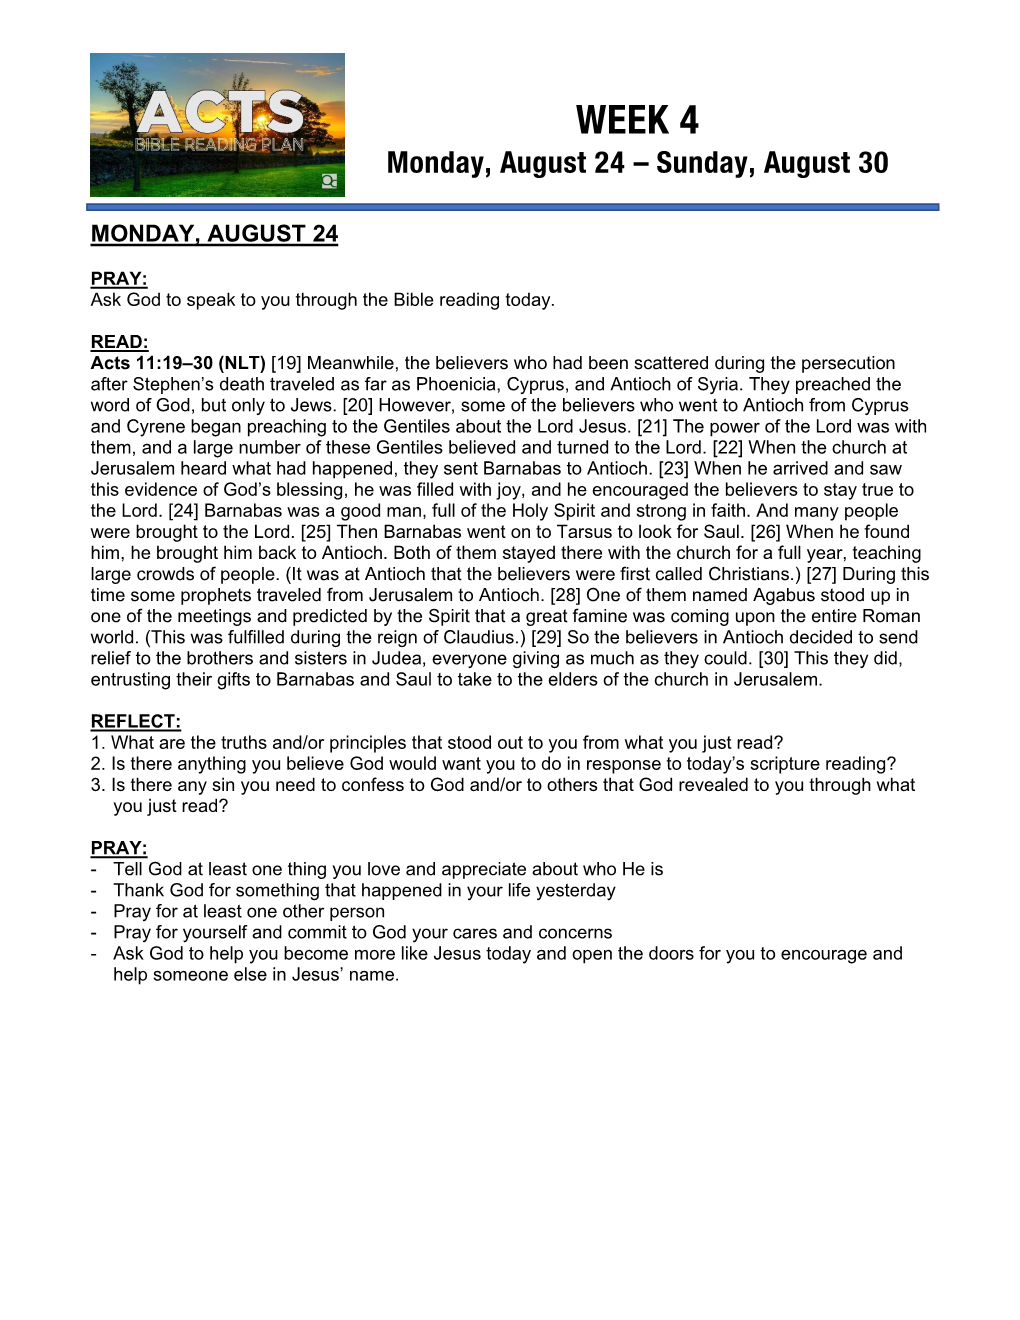 WEEK 4 Monday, August 24 – Sunday, August 30